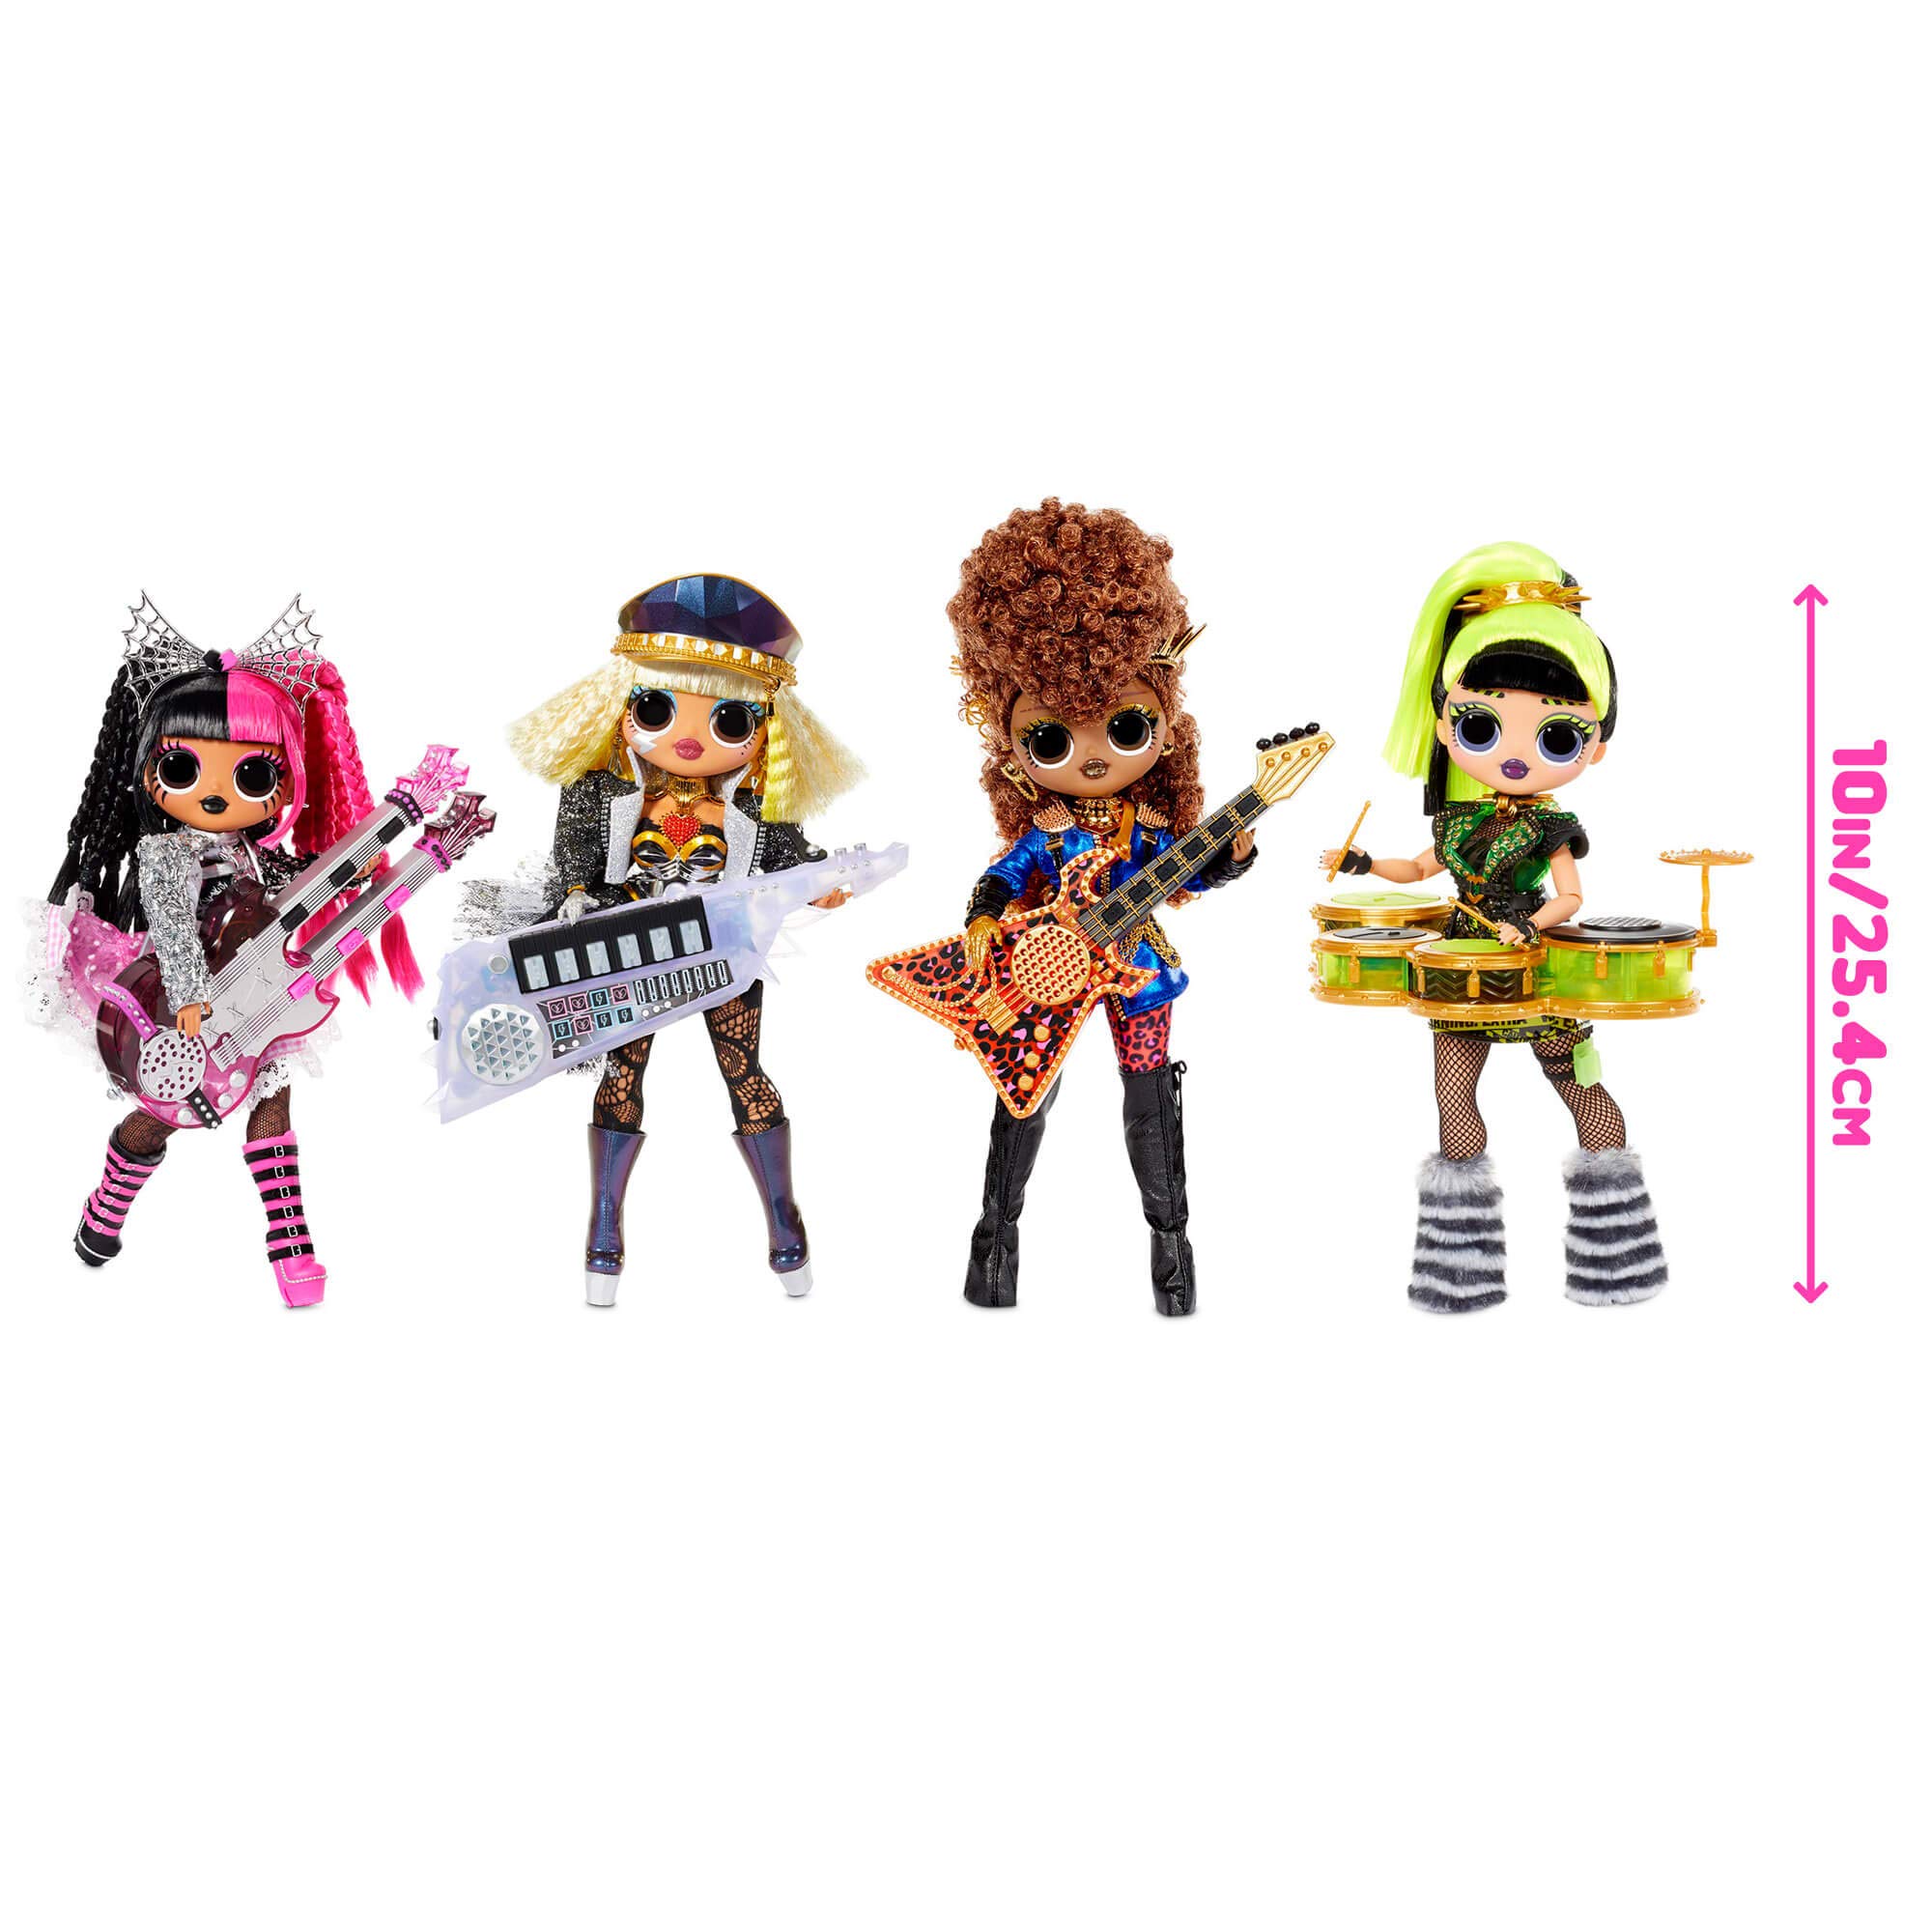 L.O.L. Surprise! OMG Remix Super Surprise with 70+ Surprises, Plays Music, 4 Fashion Dolls And 4 Dolls (Sisters), Rock Instruments, Boom Box Packaging, And Rock Band Accessories | Ages 4+